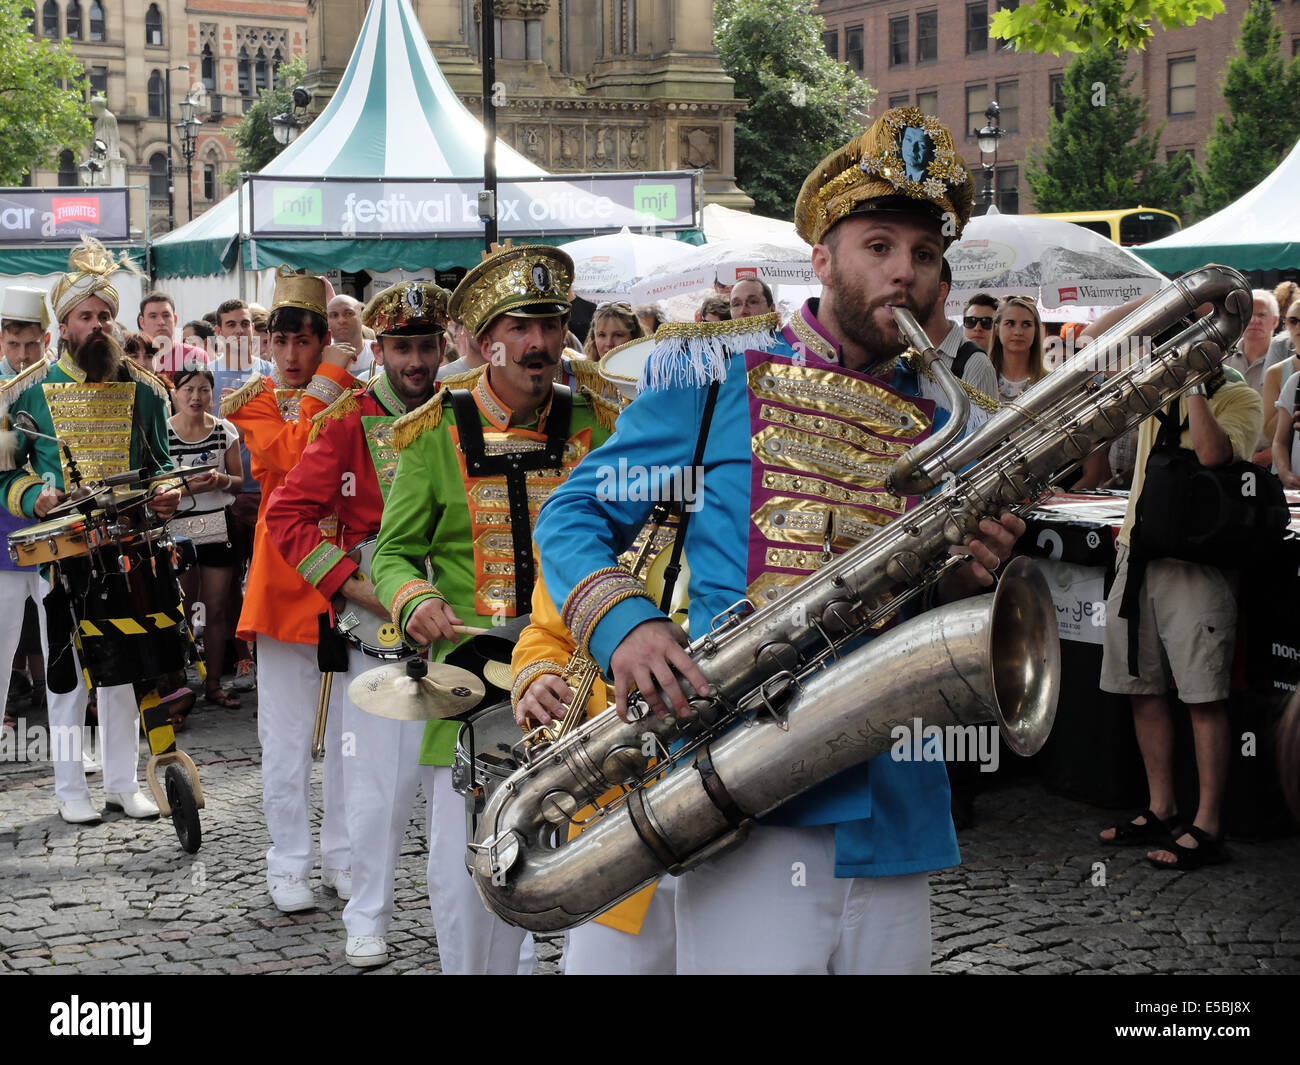 Manchester, UK. 26th July, 2014. 'Mr Wilson's second liners' New Orleans style marching band get the public on its feet at the Manchester Jazz Festival in Albert Square, Manchester UK CREDIT:RowlandJones/Alamy Live News Stock Photo